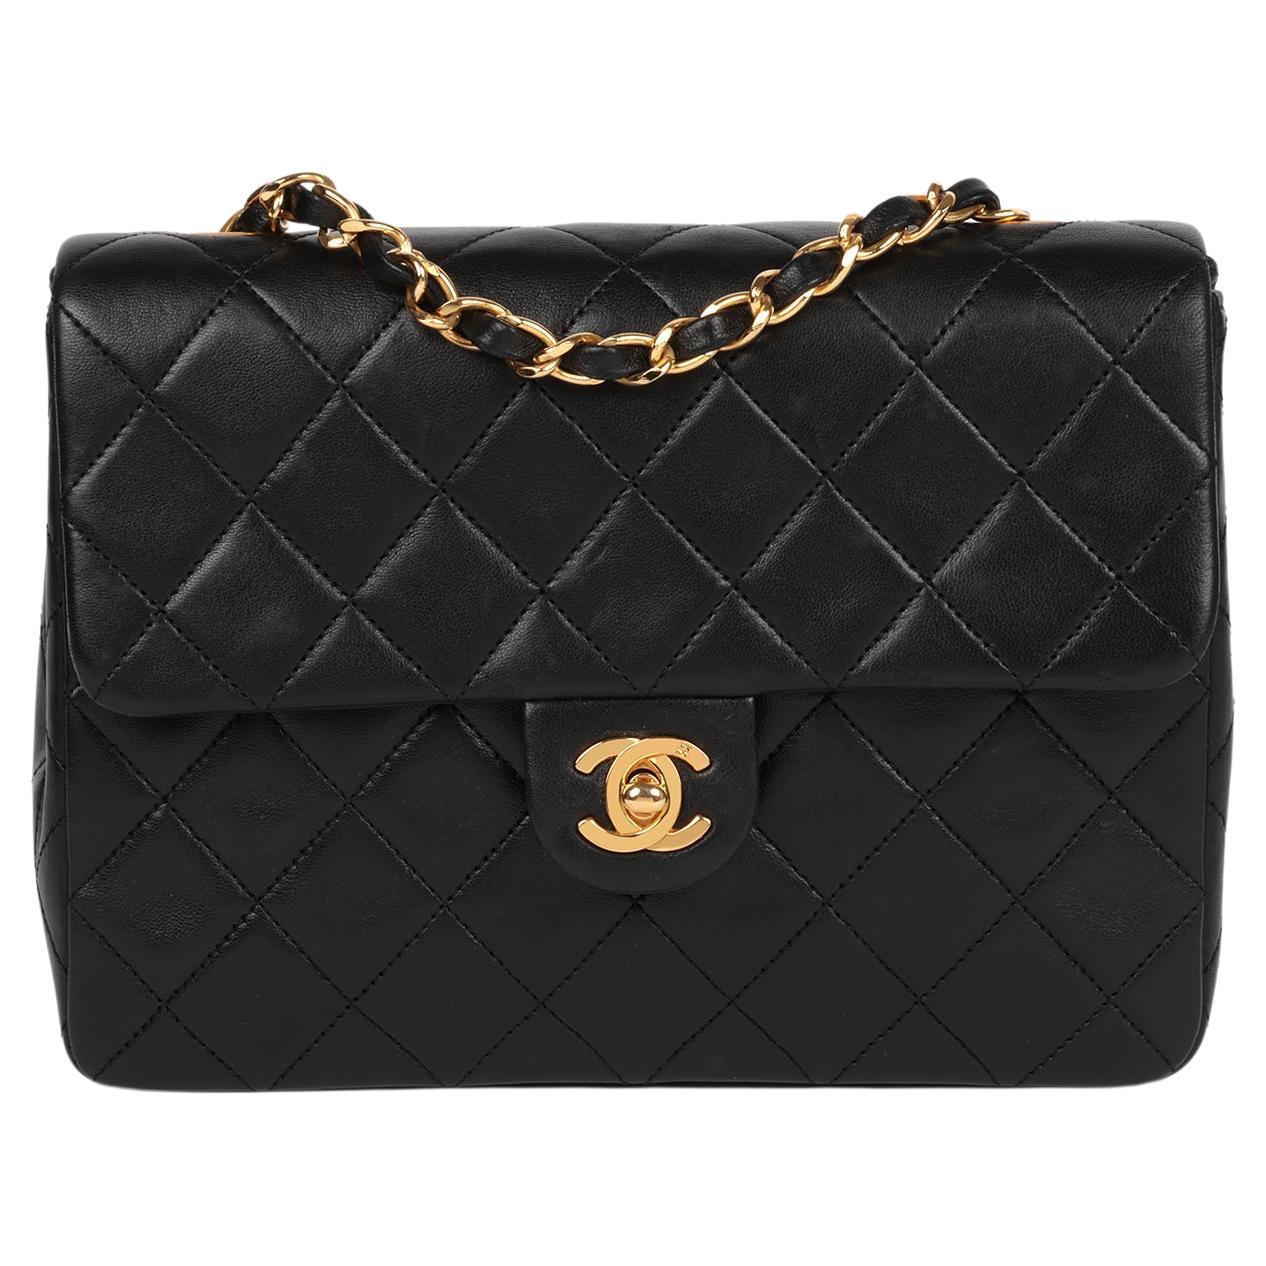 Are Chanel flap bags crossbodies?